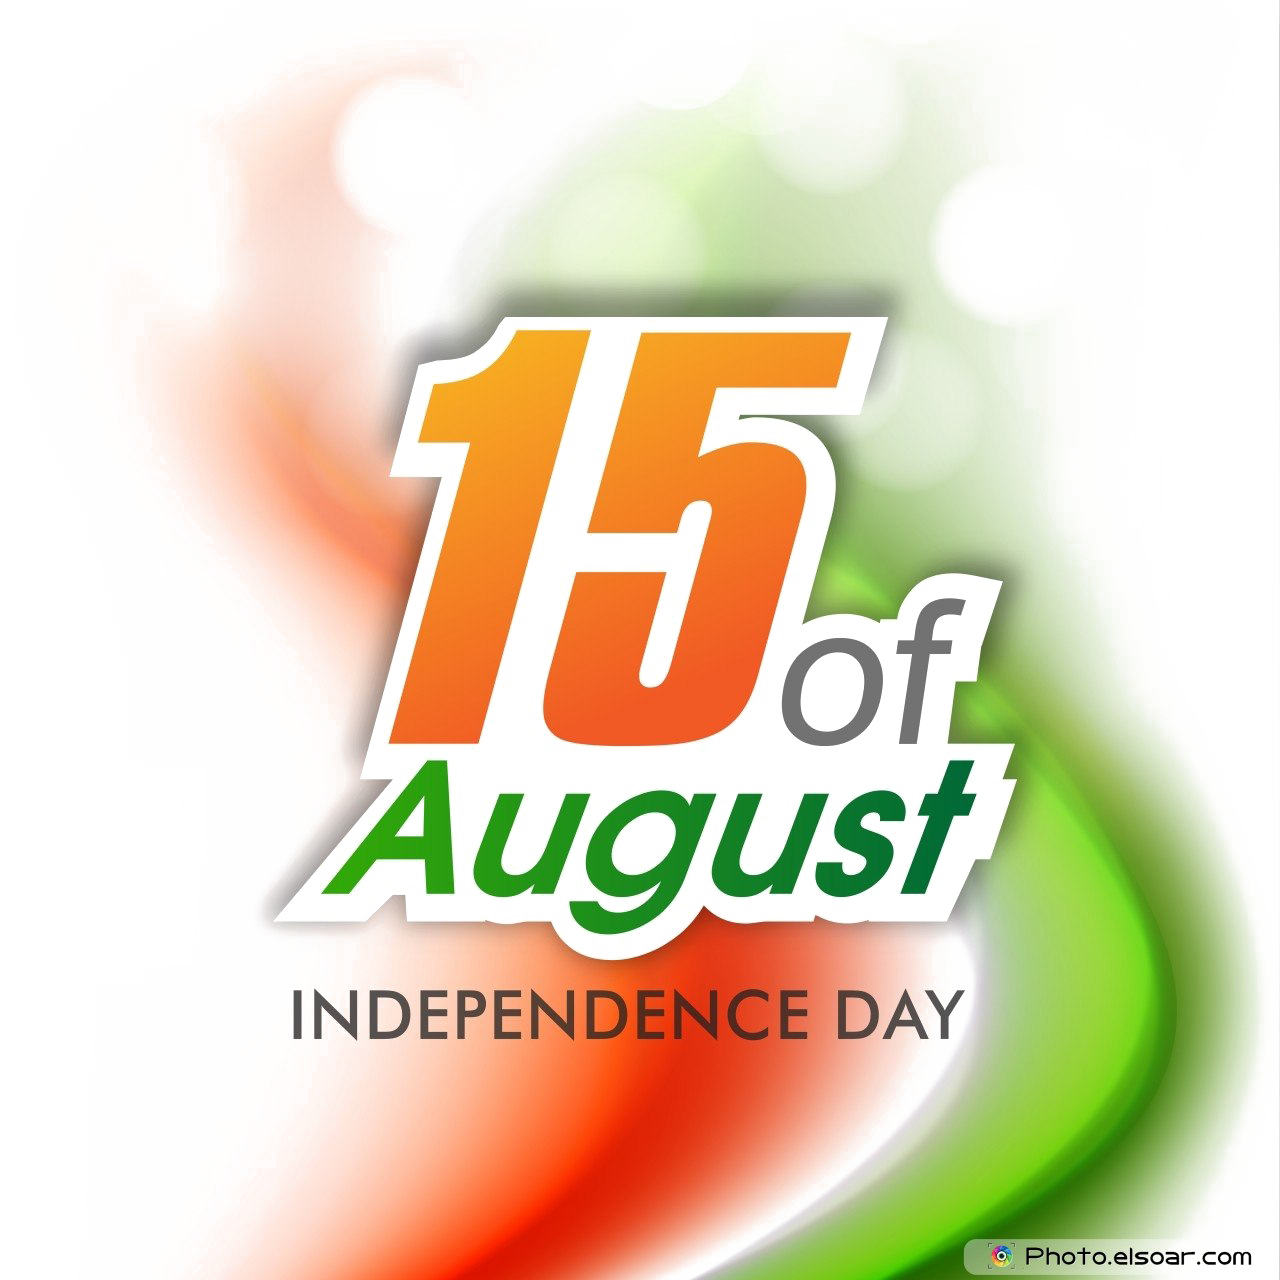 Independence Day India PNG Images Transparent Free Download.